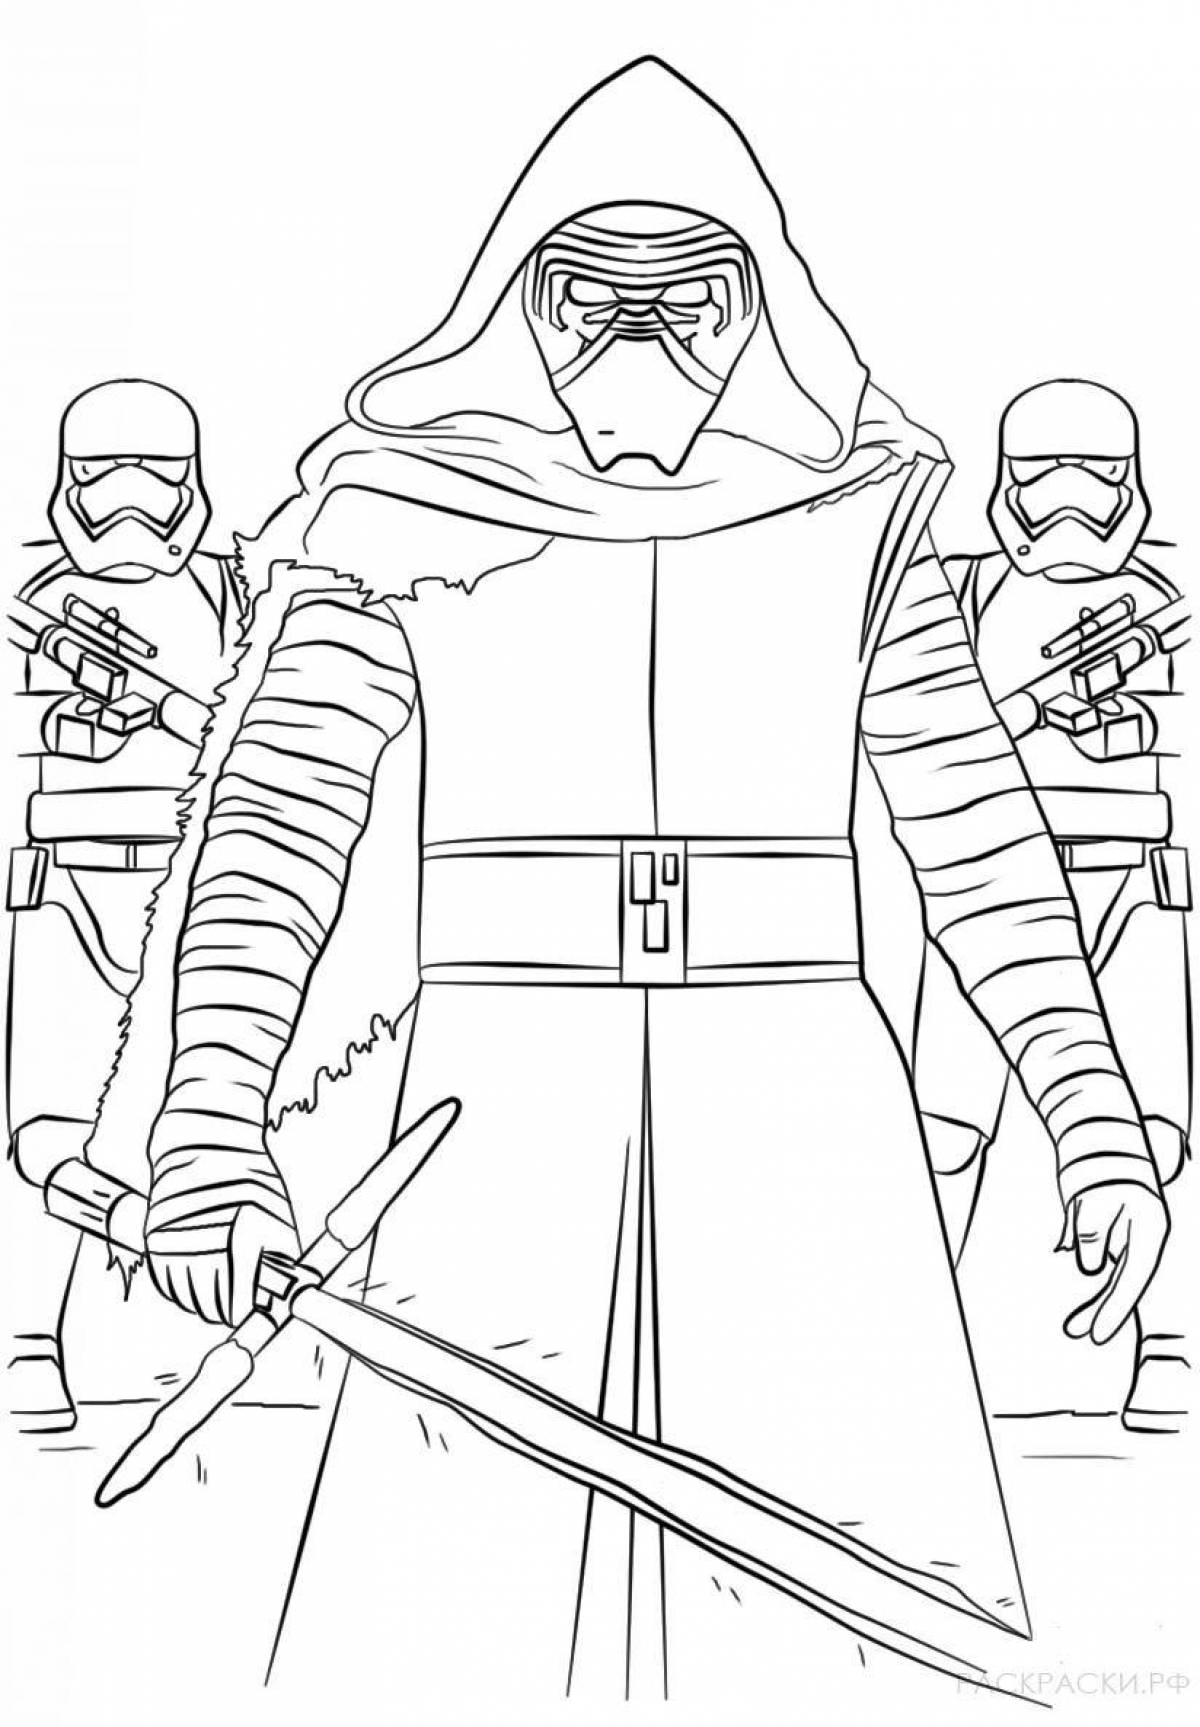 Great star wars coloring book